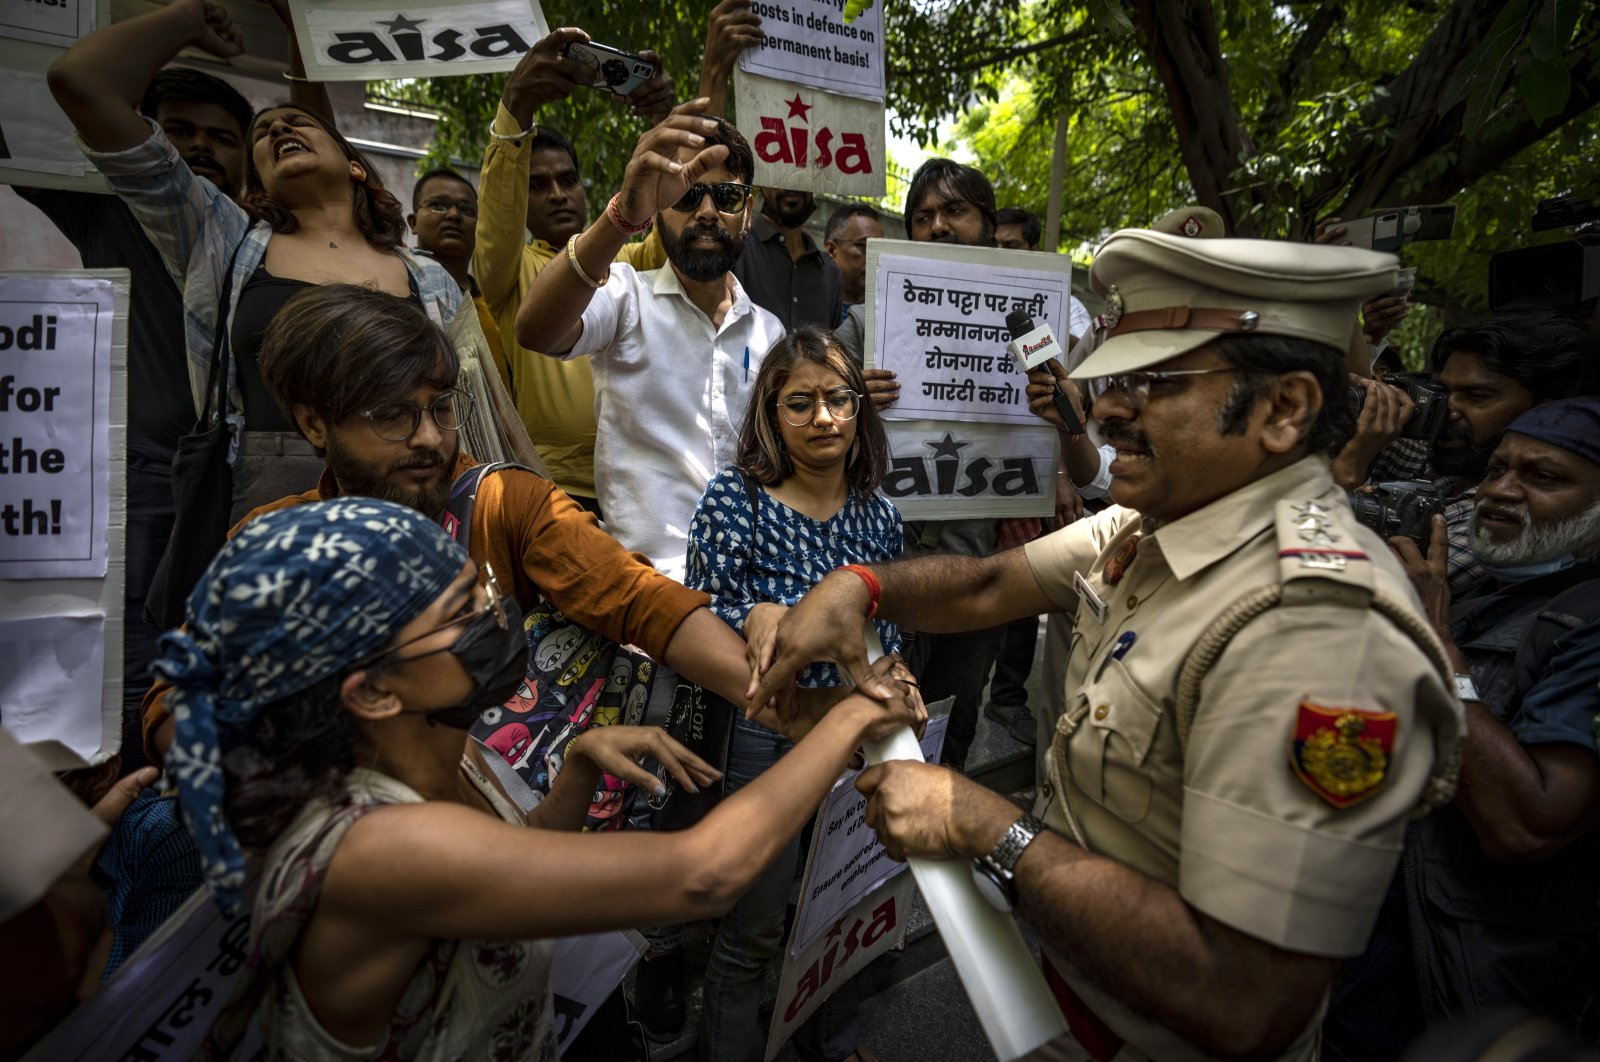 A Delhi police officer snatches placards from student activists during a protest demonstration against a new short-term government recruitment scheme for the military, New Delhi, India, June 17, 2022. (AP Photo)